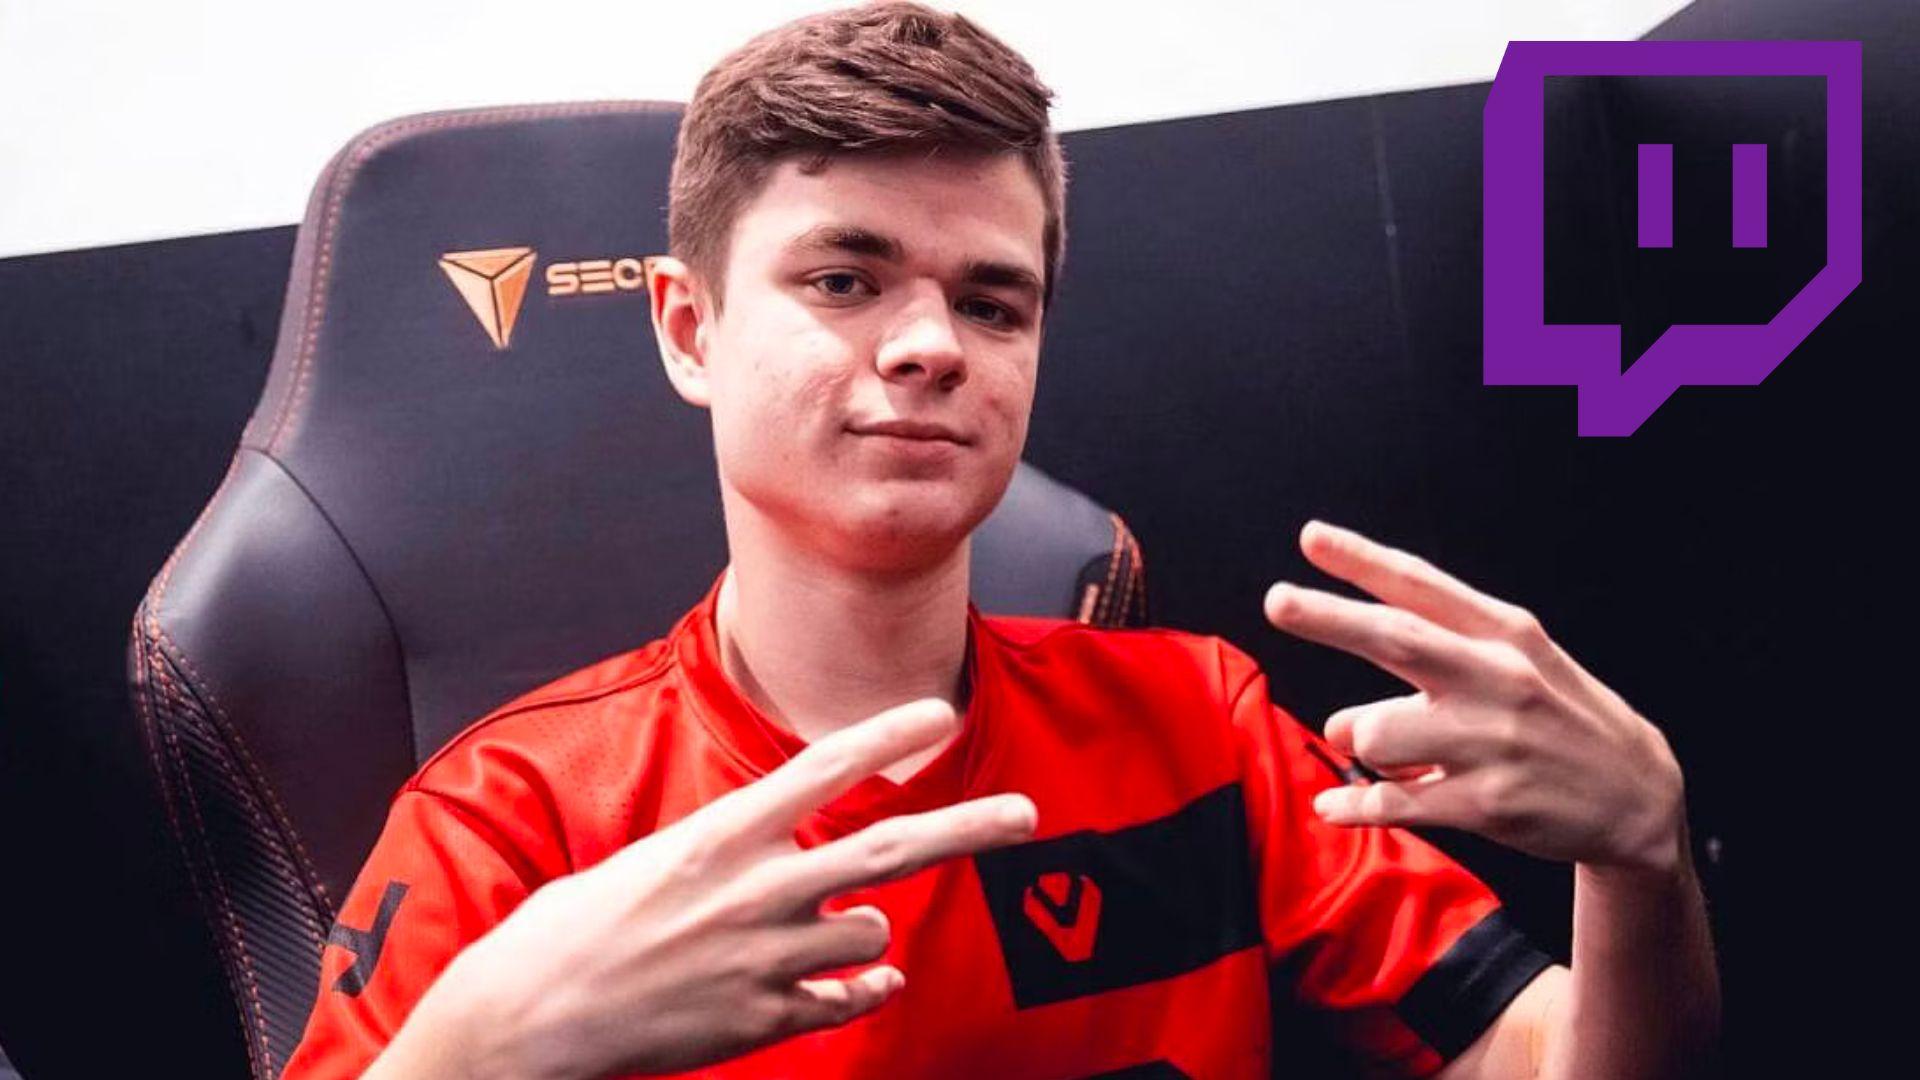 SicK sat in black chair wearing red Sentinels jersey next to Twitch logo